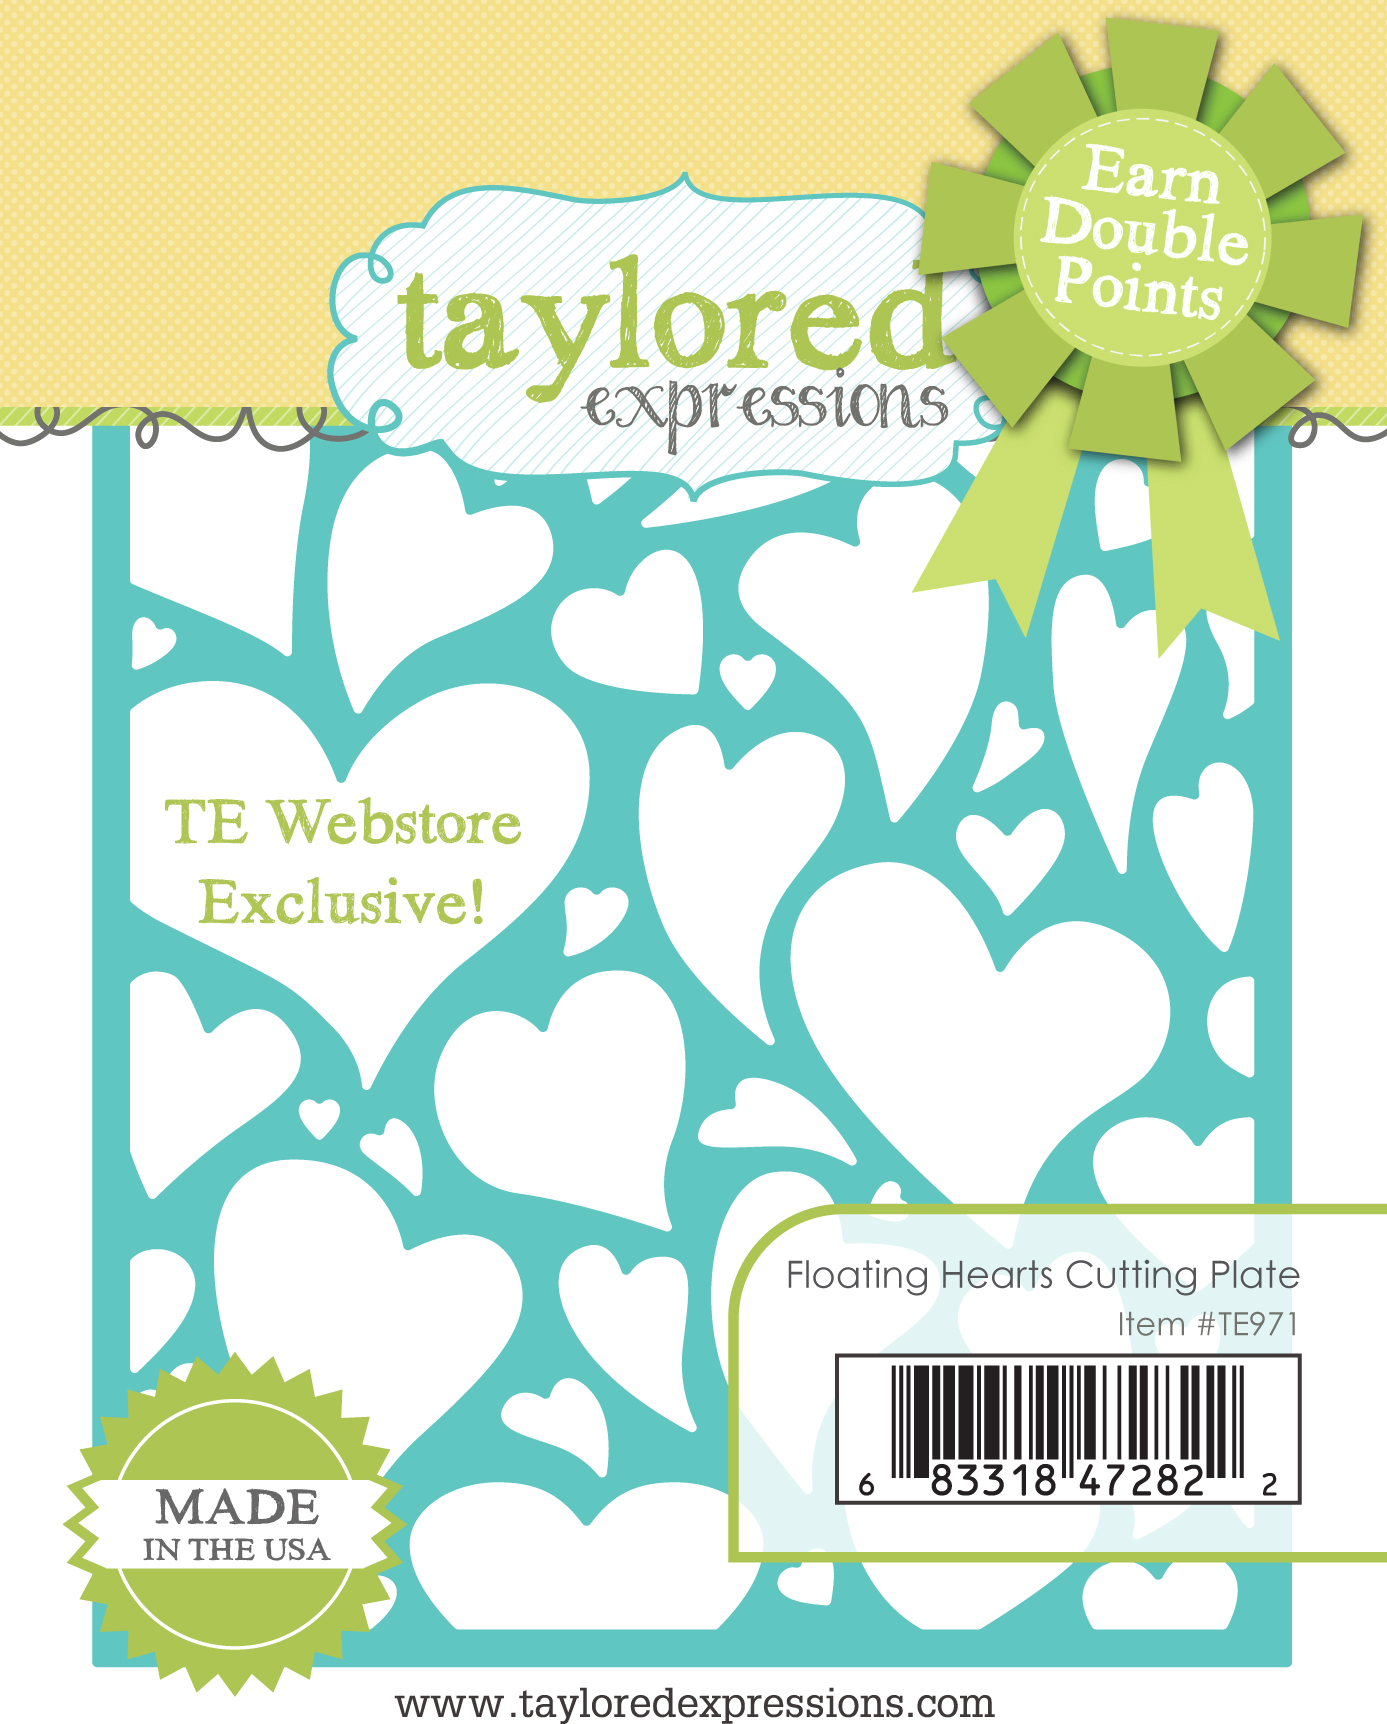 TE Floating Hearts Cutting Plate Promotion